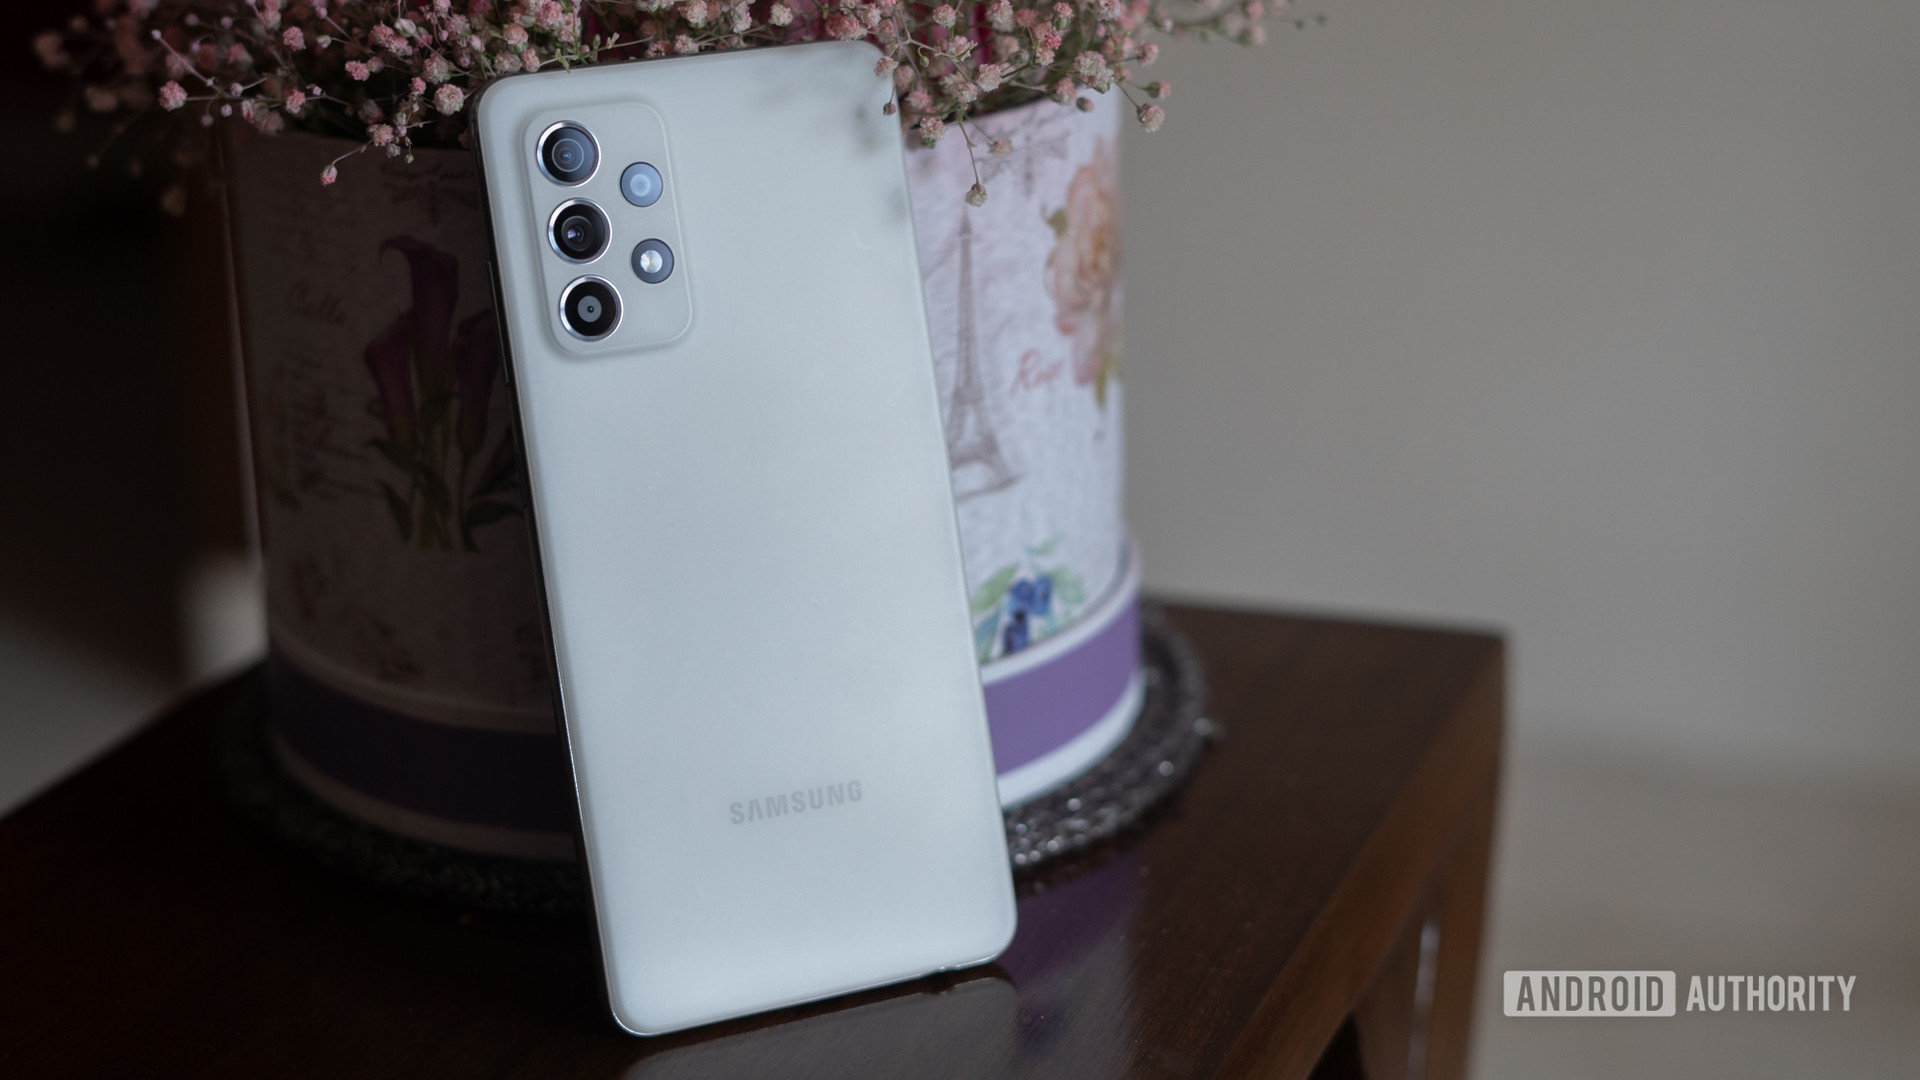 Samsung Galaxy A52s 5G angled up against flower pot